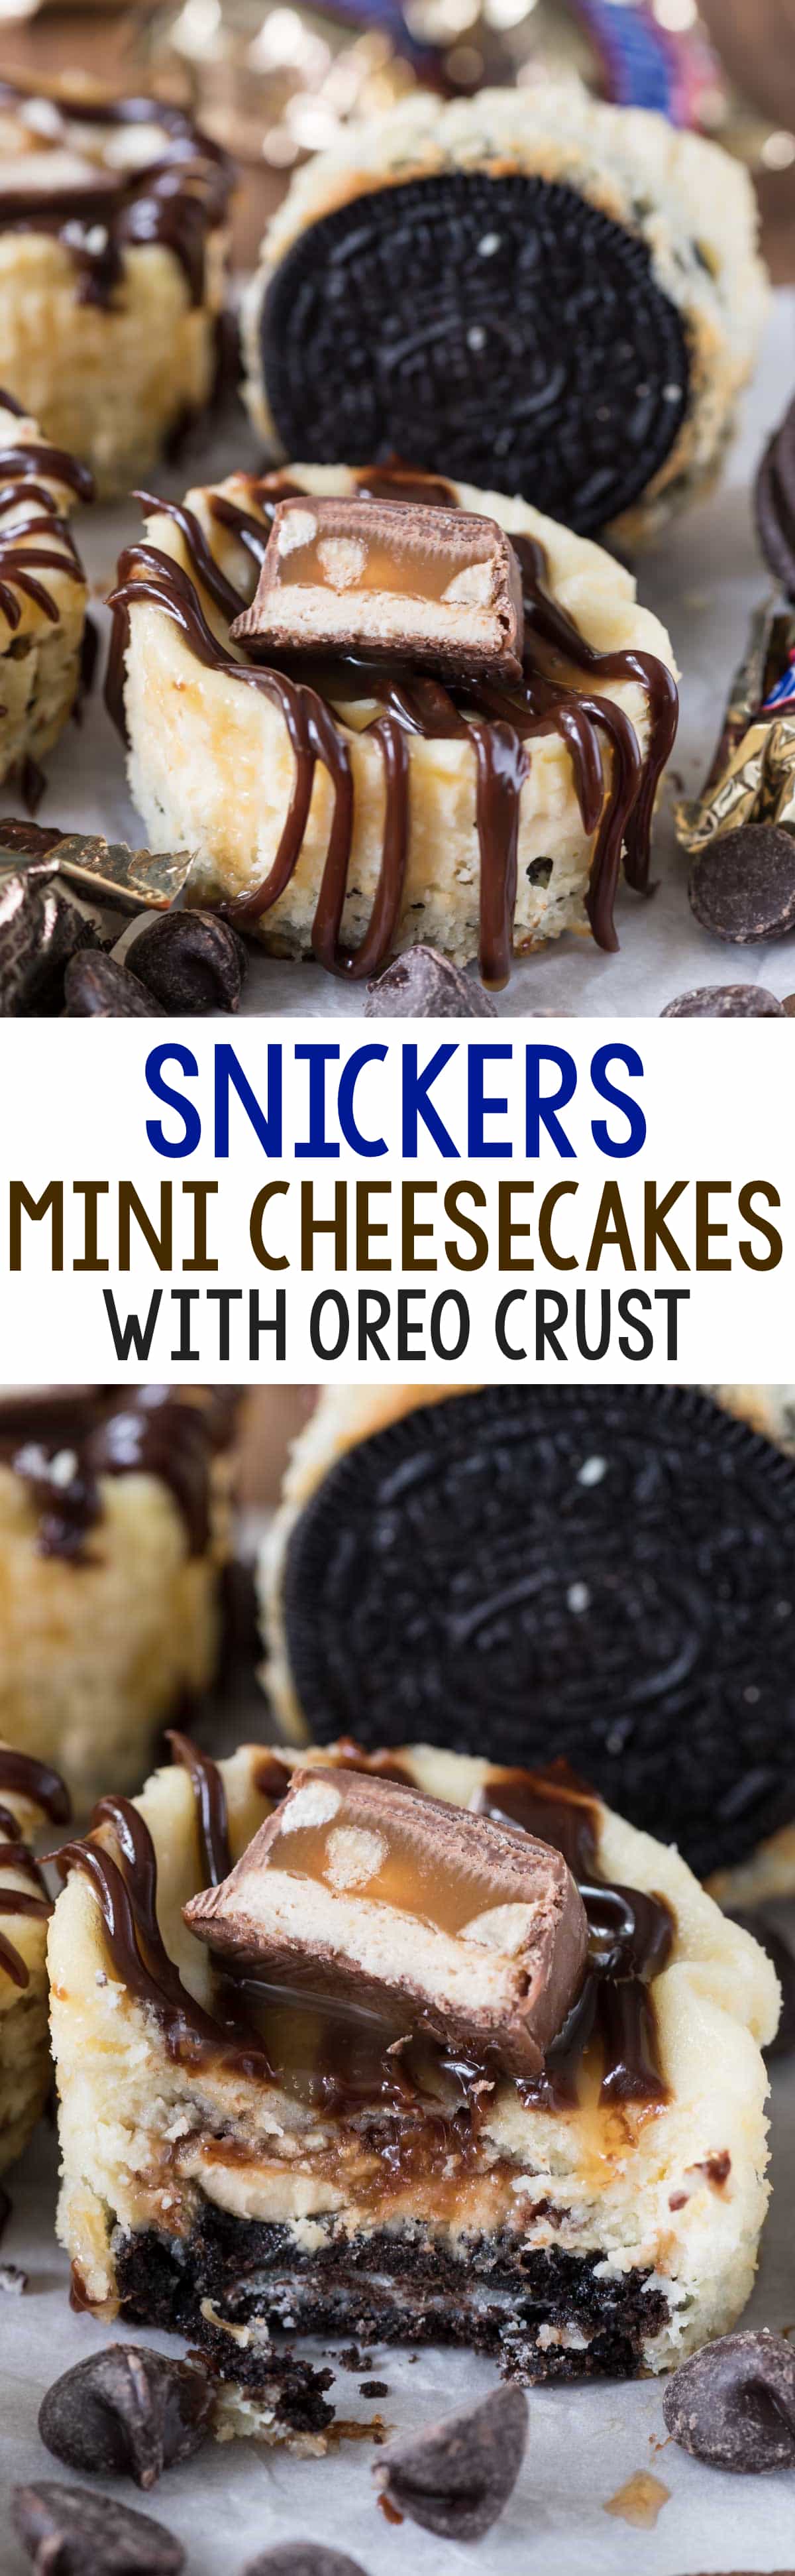 Mini Snickers Cheesecakes - these easy cheesecakes are made in a muffin cup with an Oreo crust and a surprise Snickers bite filling!